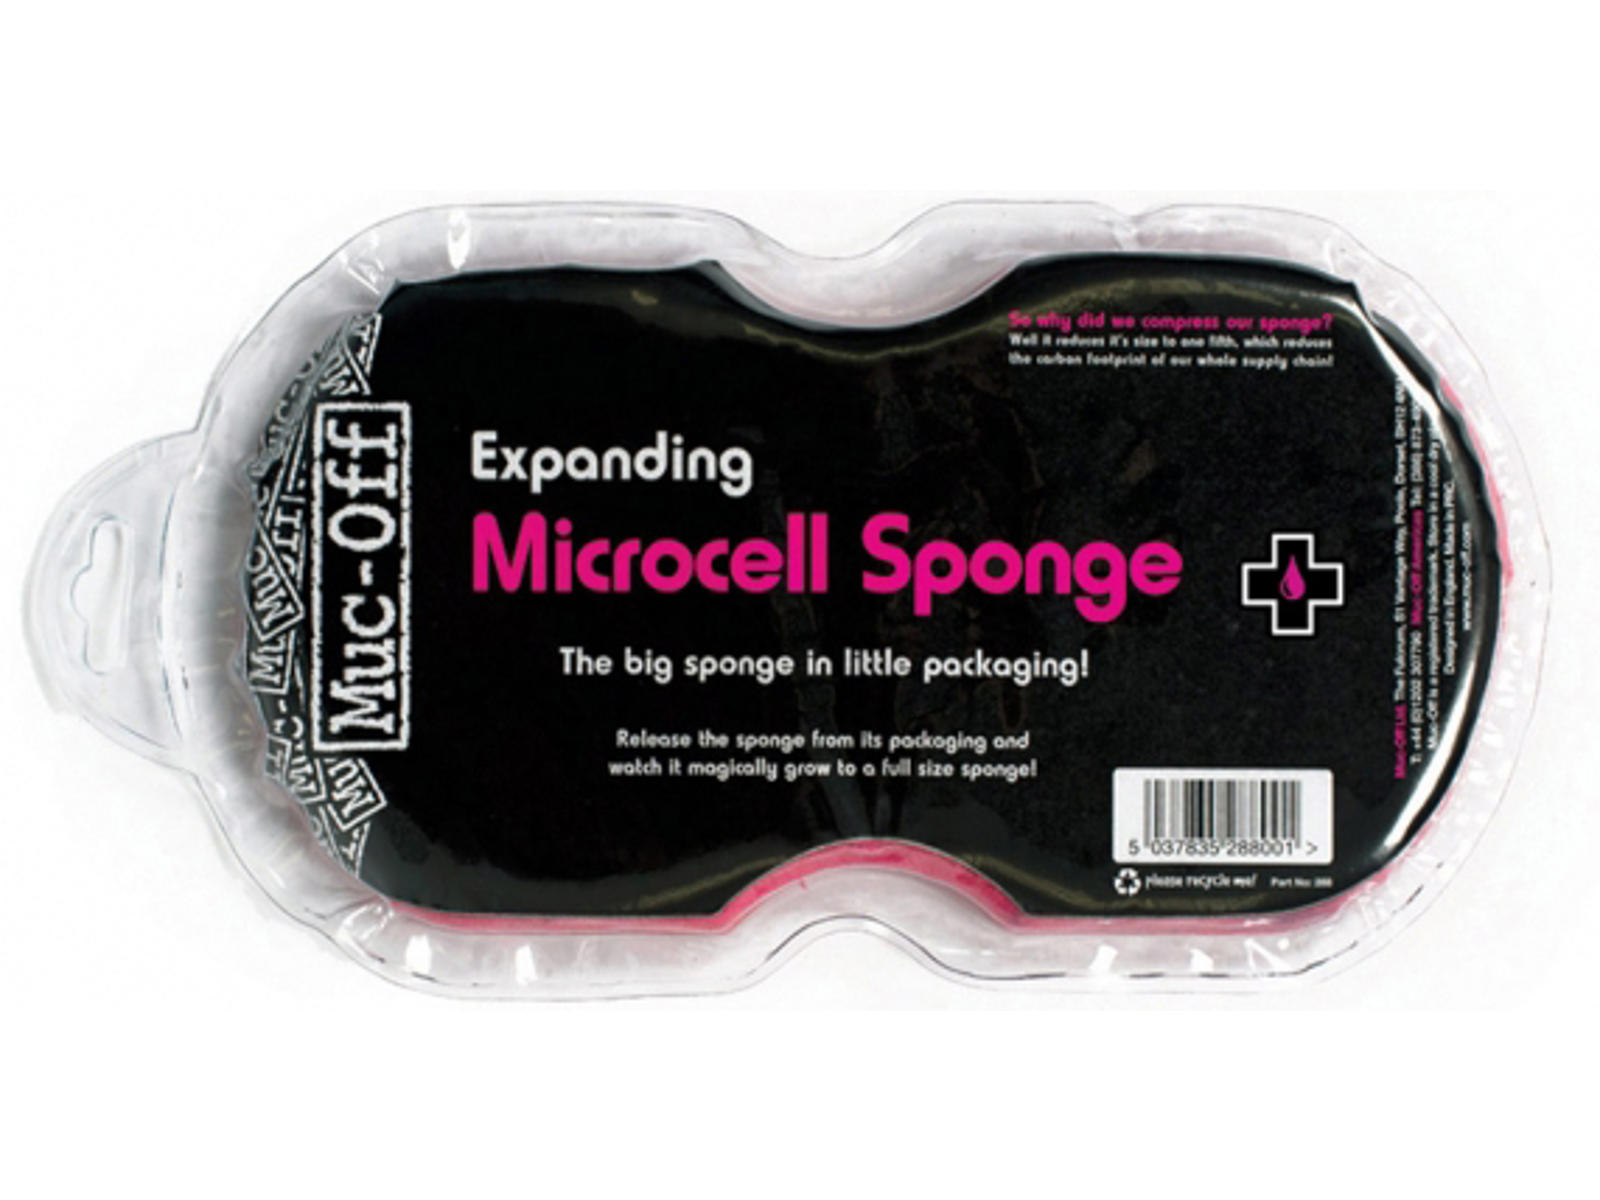 MUC-OFF Expanding Sponge microcell